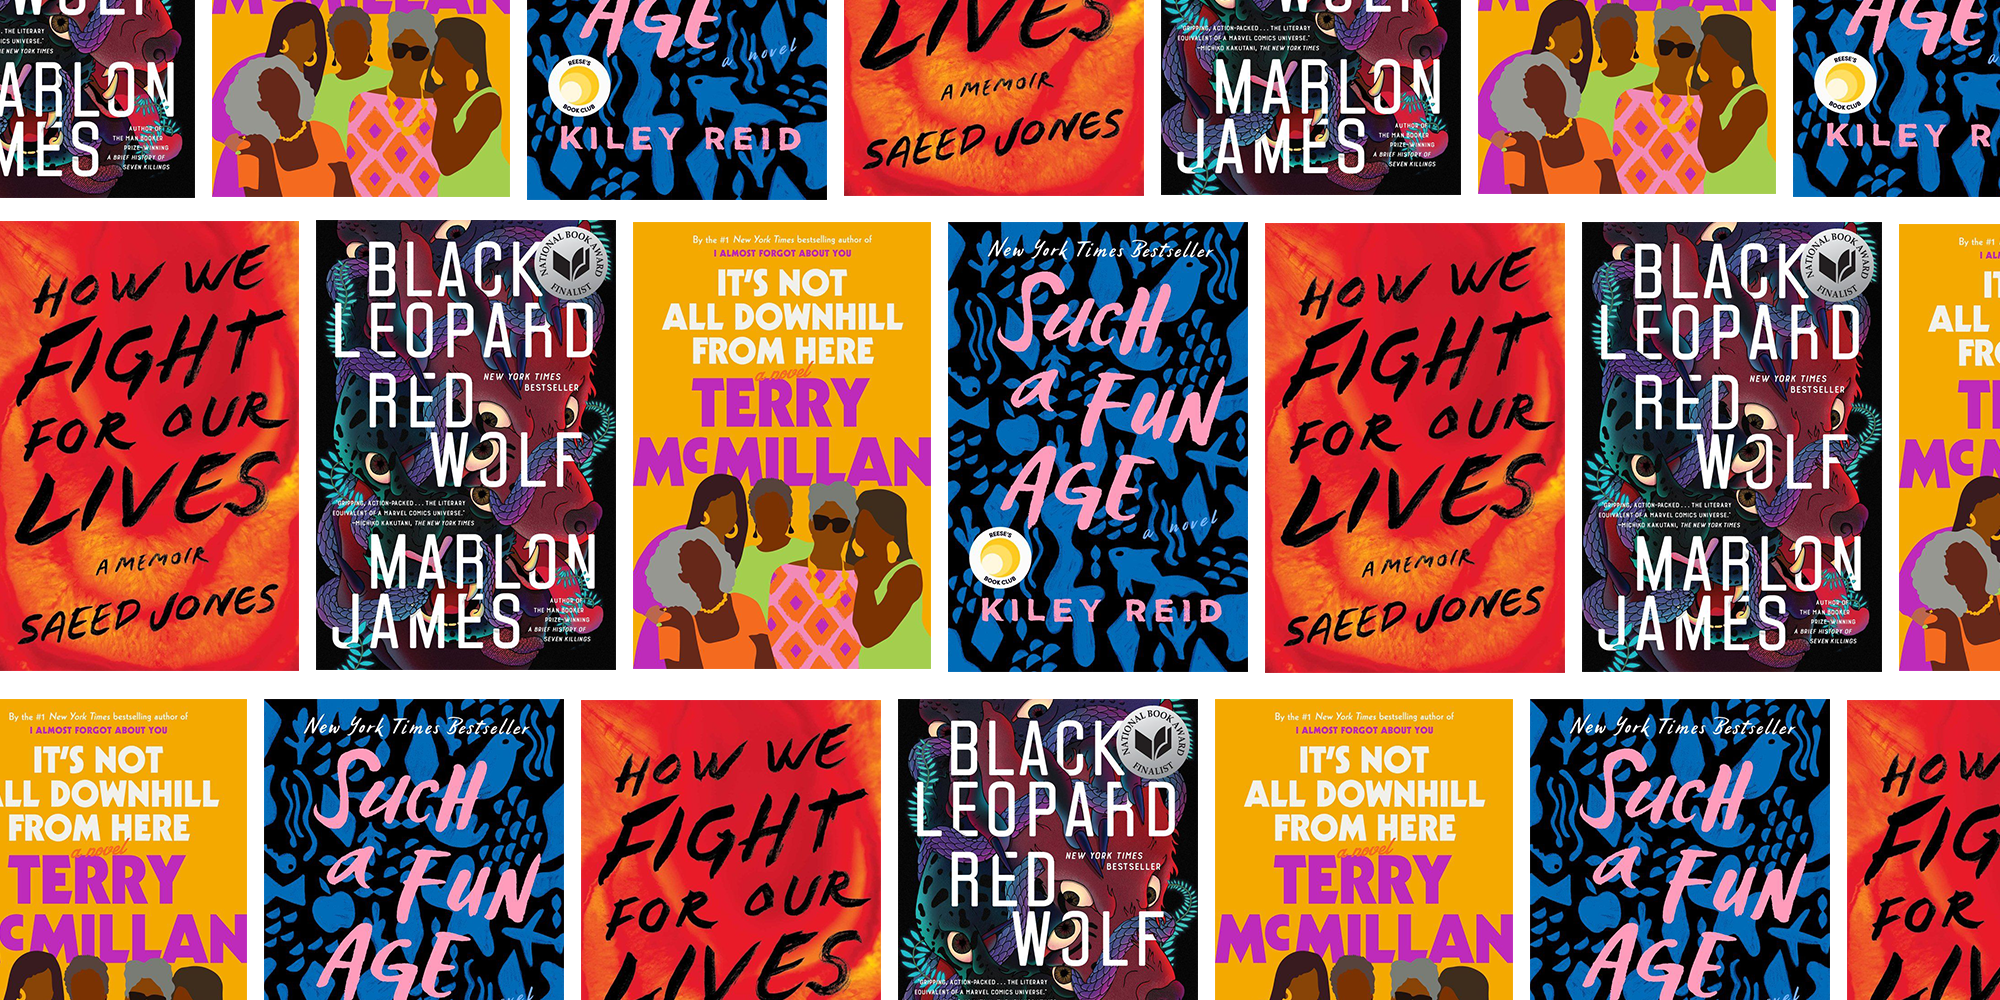 25 Books by Black Authors - Black Writers You Need to Know